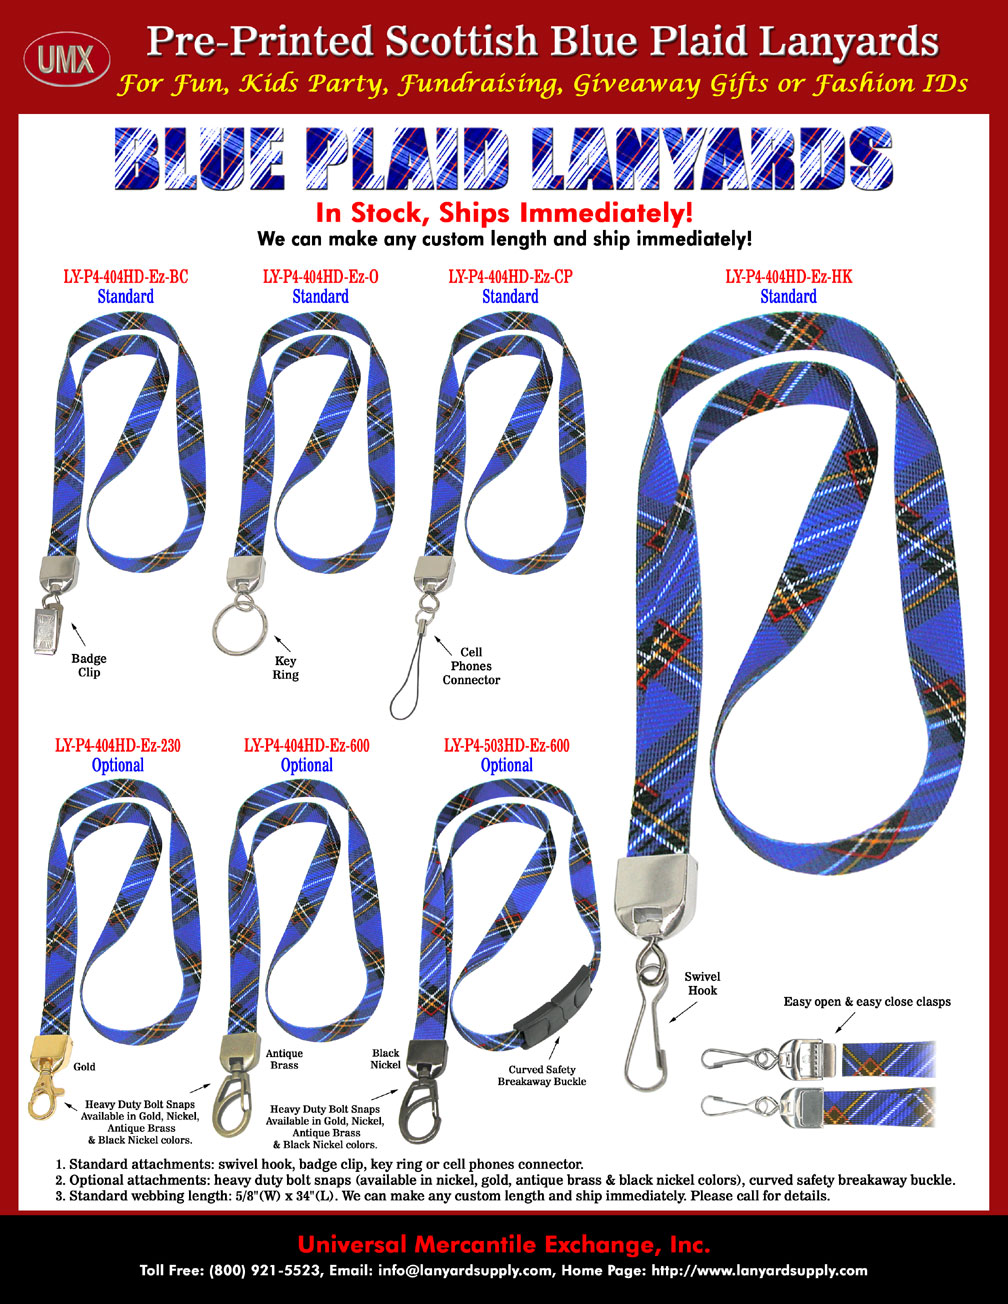 The blue plaid can be worn as blue plaid neck lanyards or blue plaid wrist lanyards.